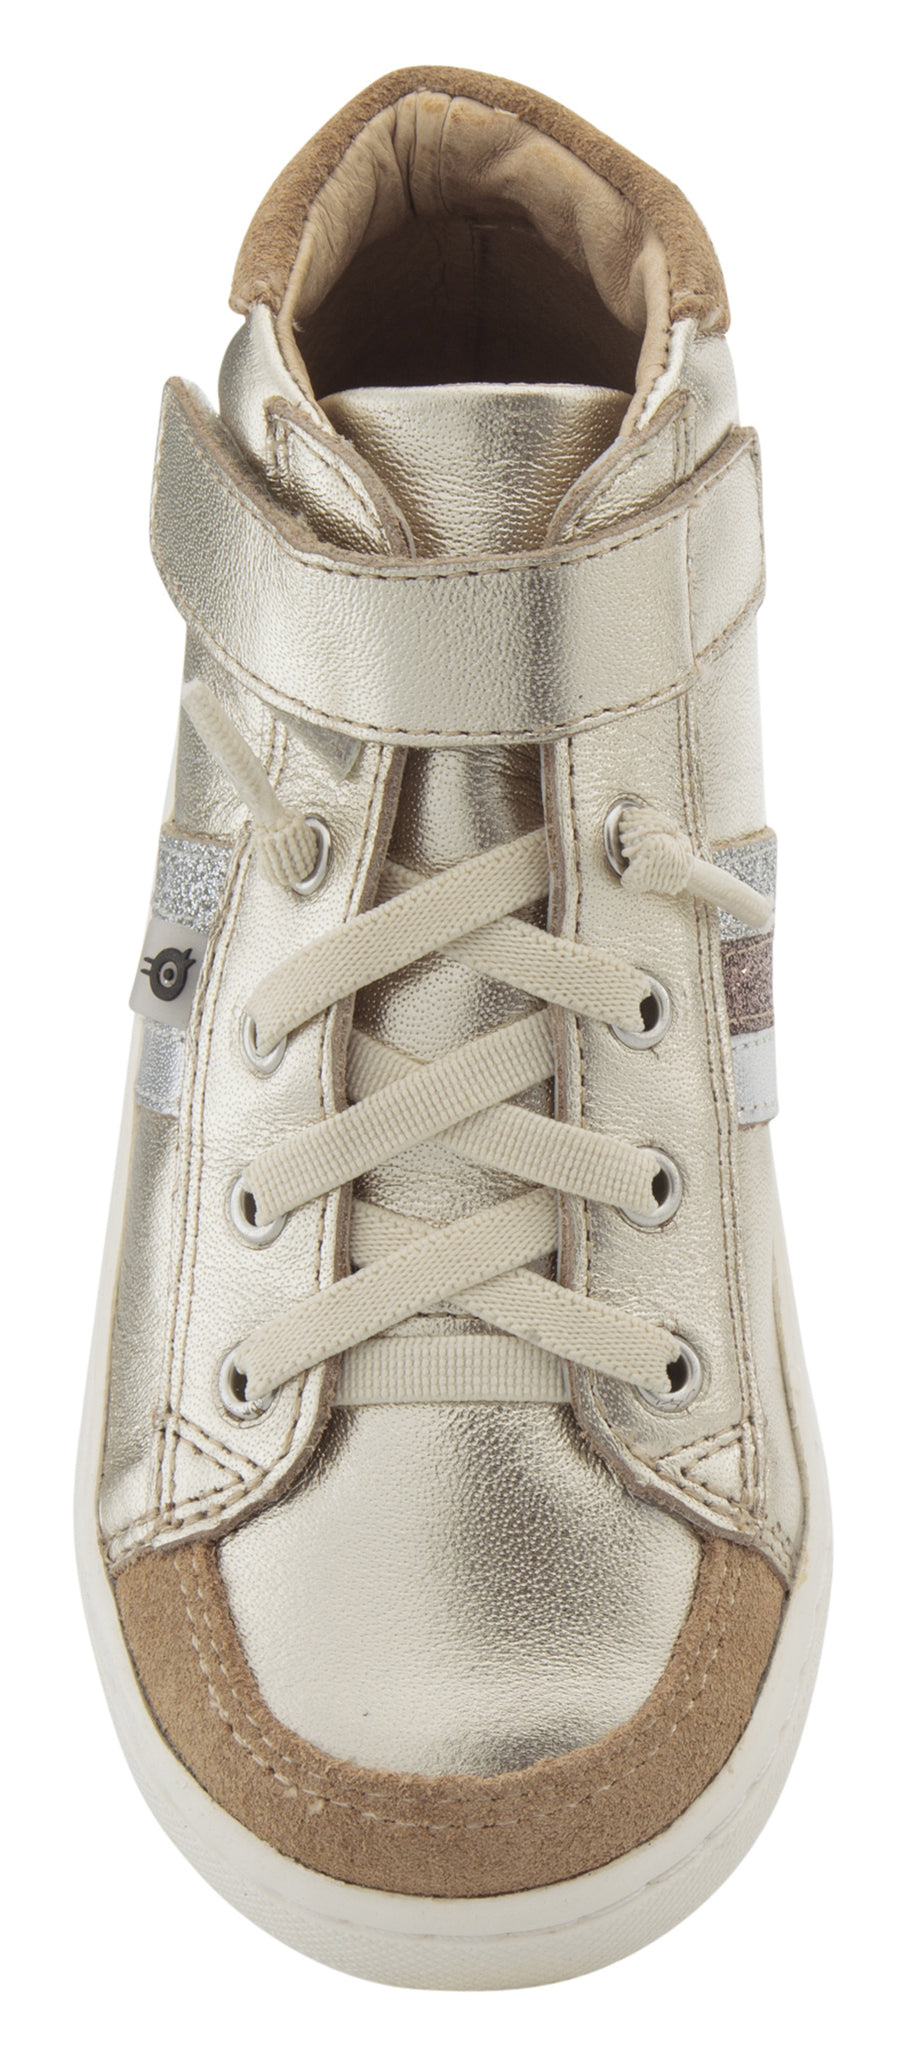 Old Soles Boy's & Girl's  Glambo High Top Leather Sneakers - Titanium/Silver/Glam Choc/Glam Argent